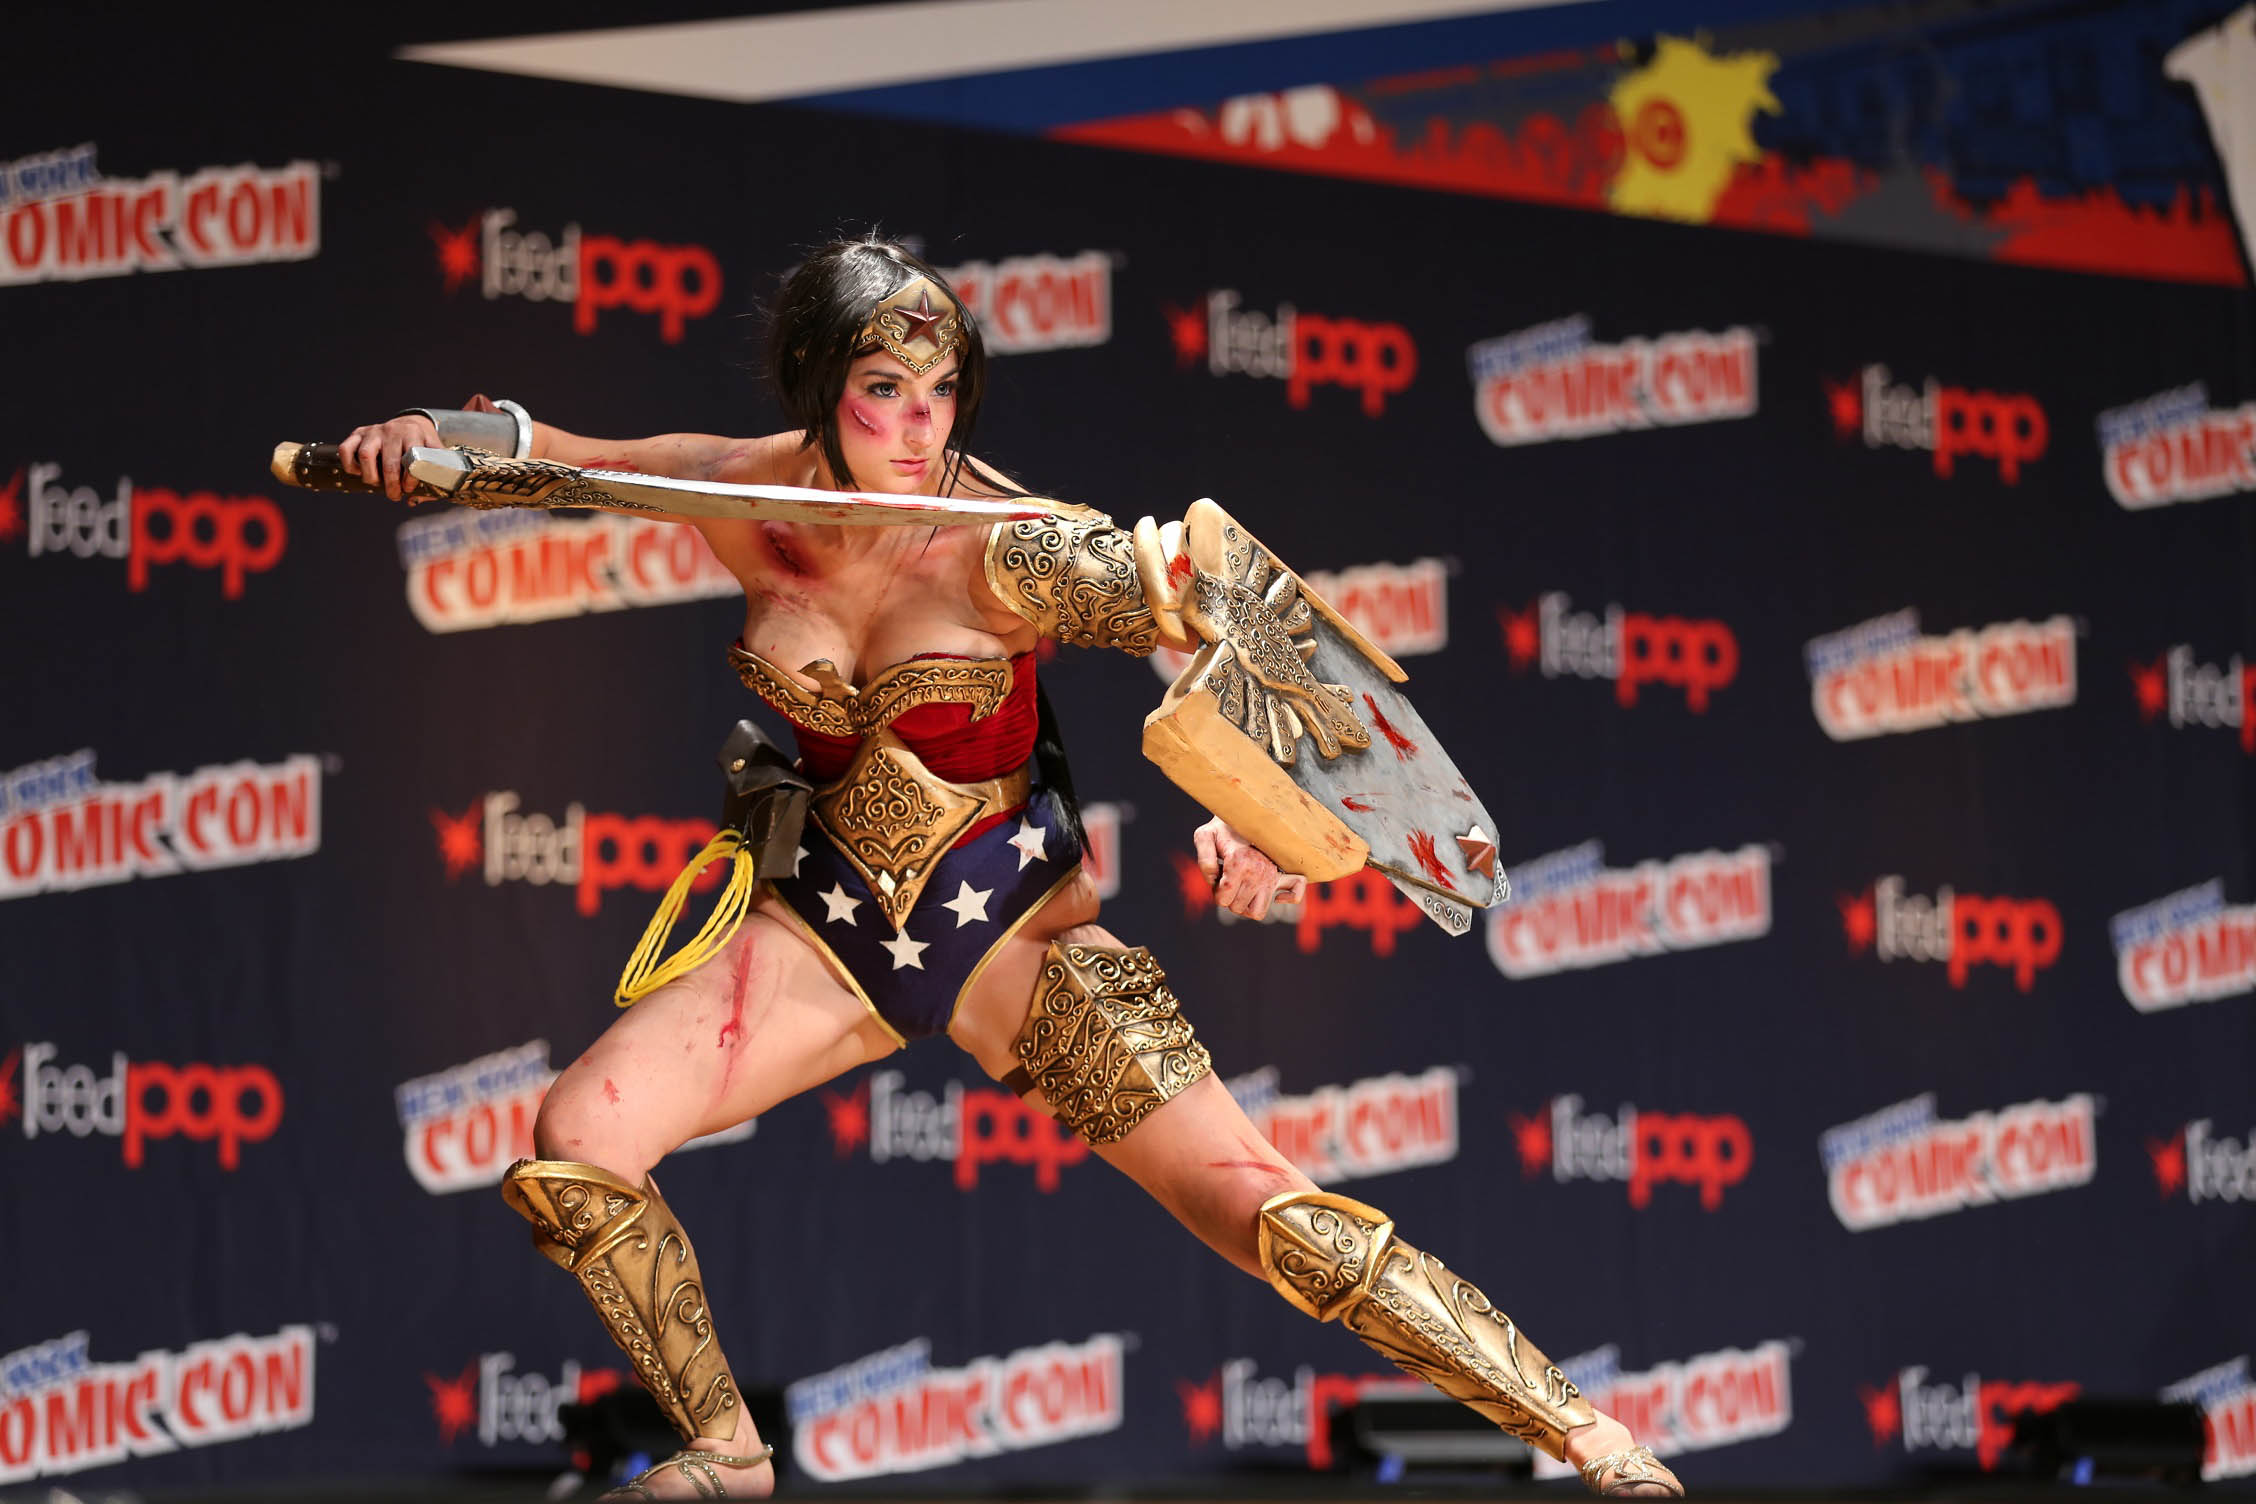 a wonder woman is doing stunts on stage